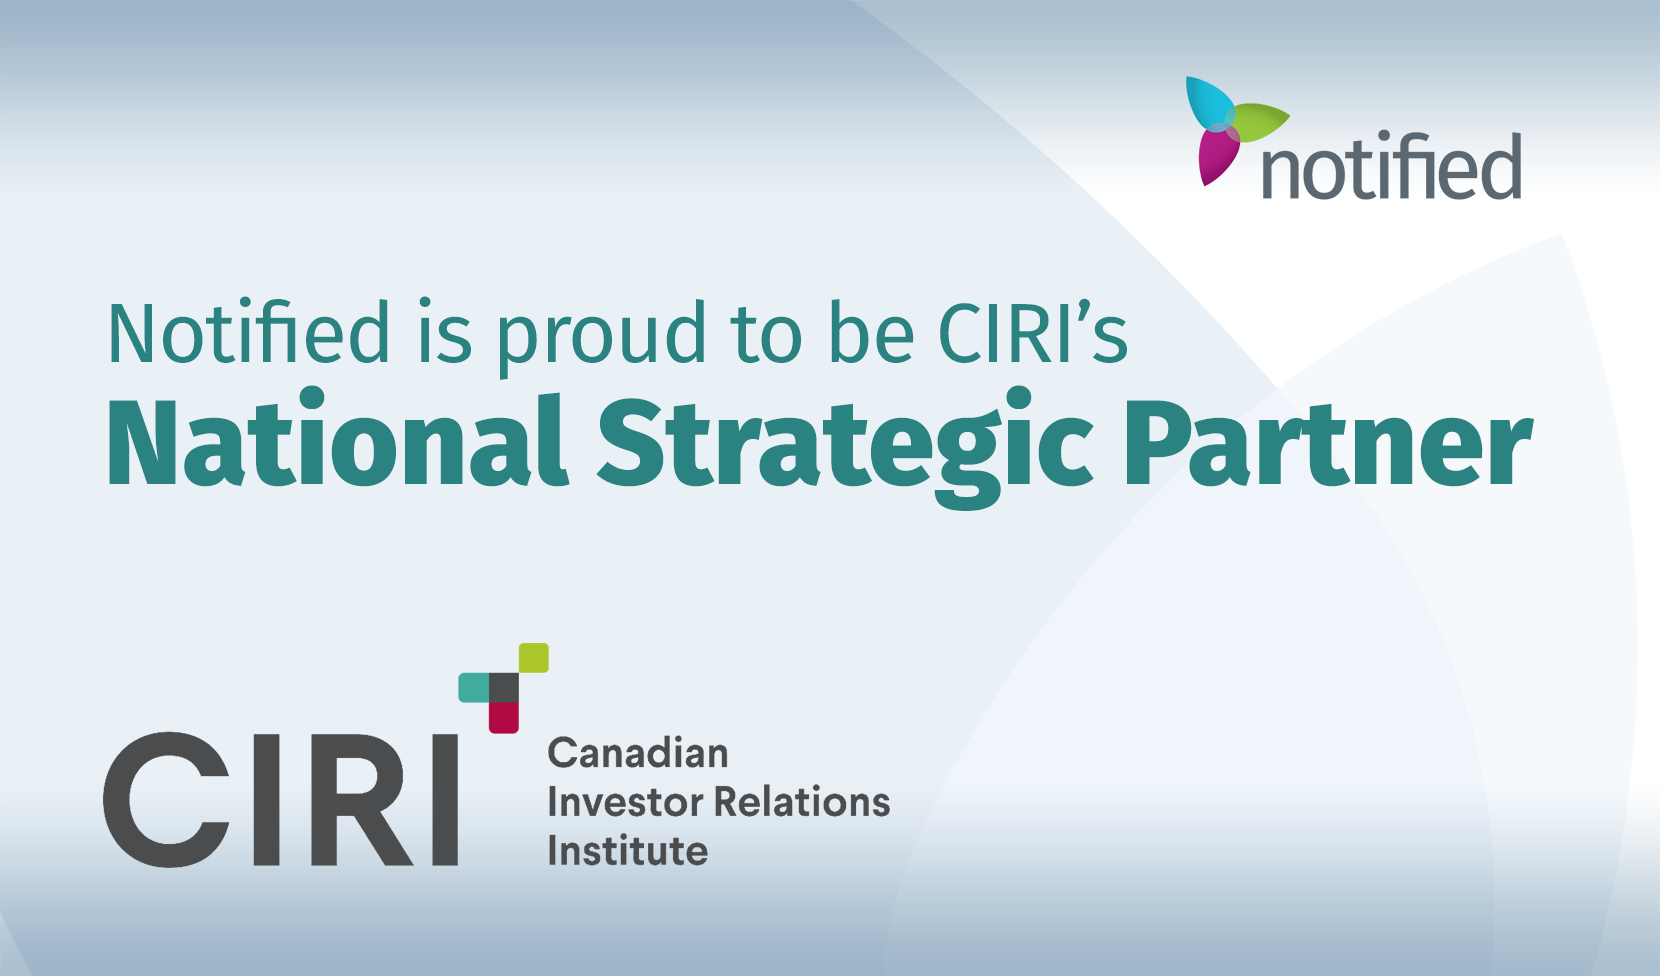 Notified, a globally trusted technology partner for investor relations, public relations and marketing professionals, today announced a National Strategic Partnership with the Canadian Investor Relations Institute (CIRI), Canada’s professional association of executives responsible for communication between public corporations, investors and the financial community.